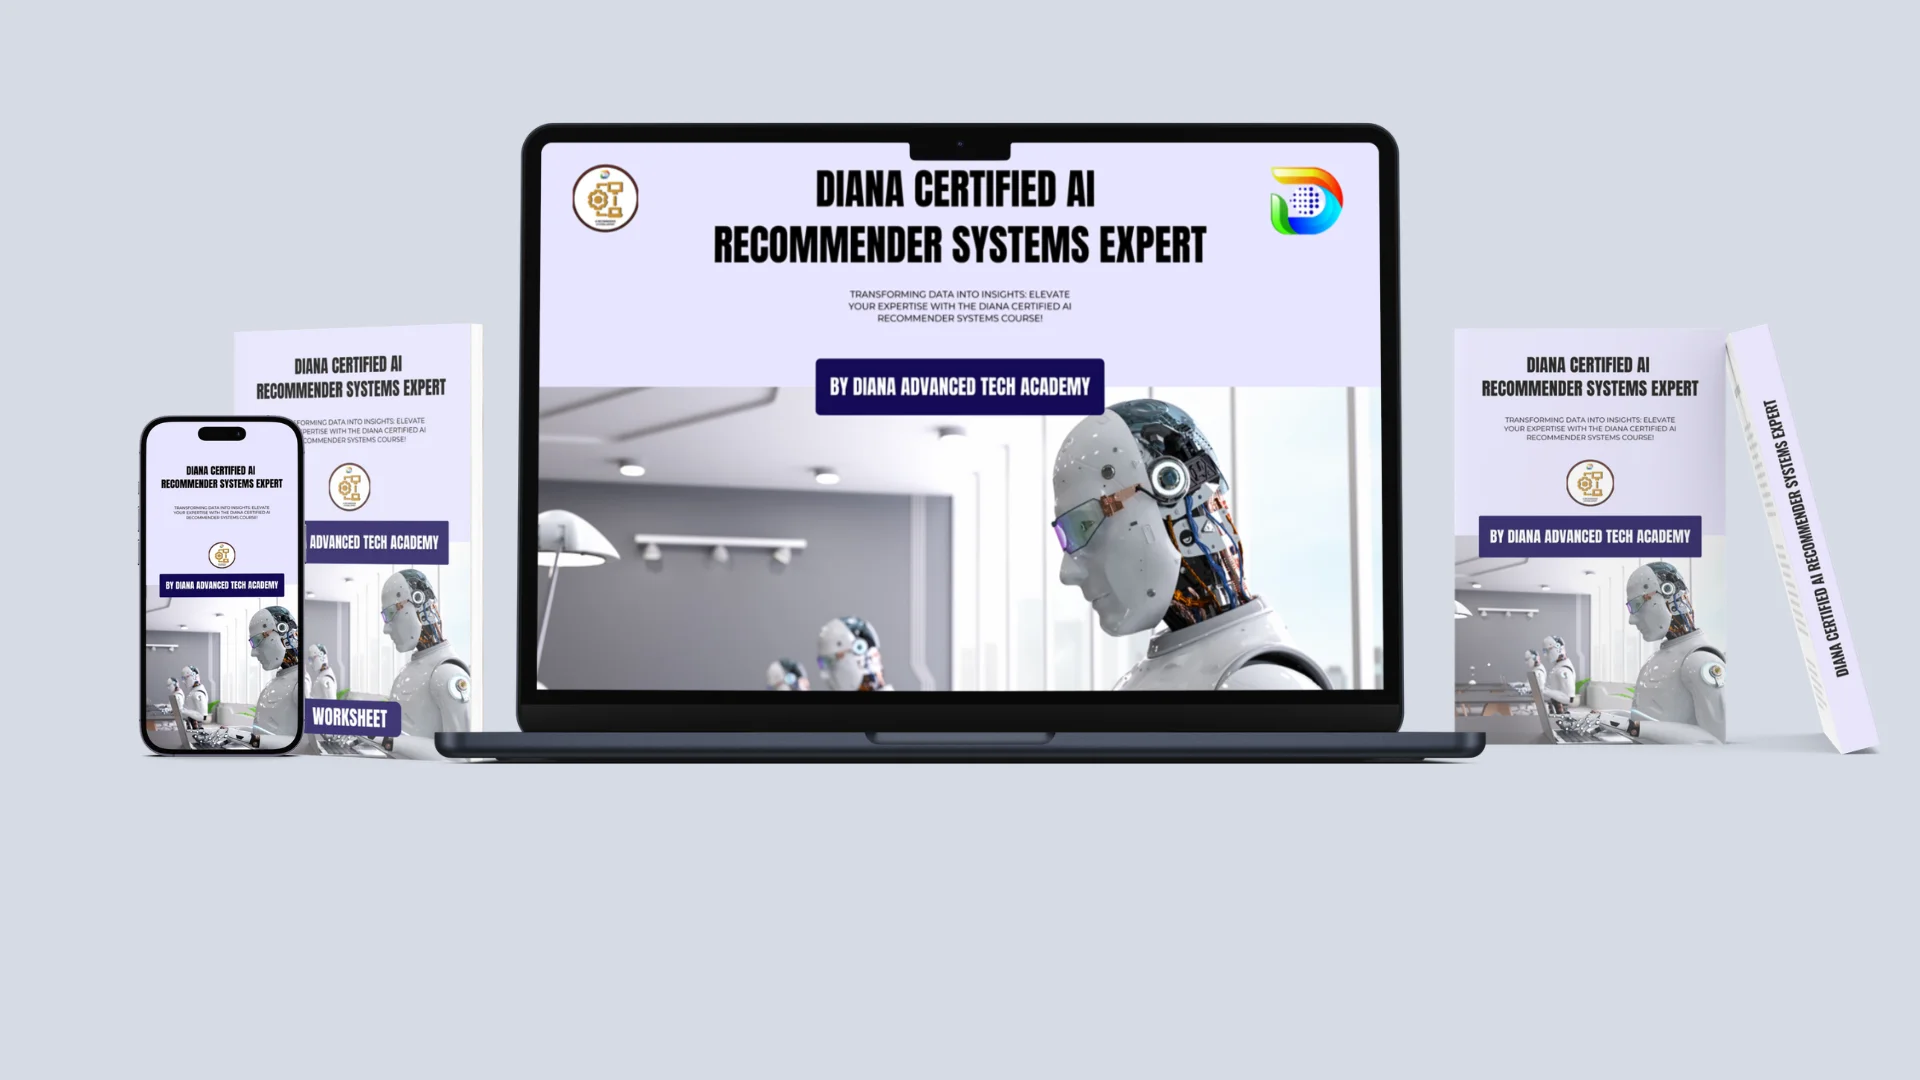 Diana Certified AI Recommender Systems Expert